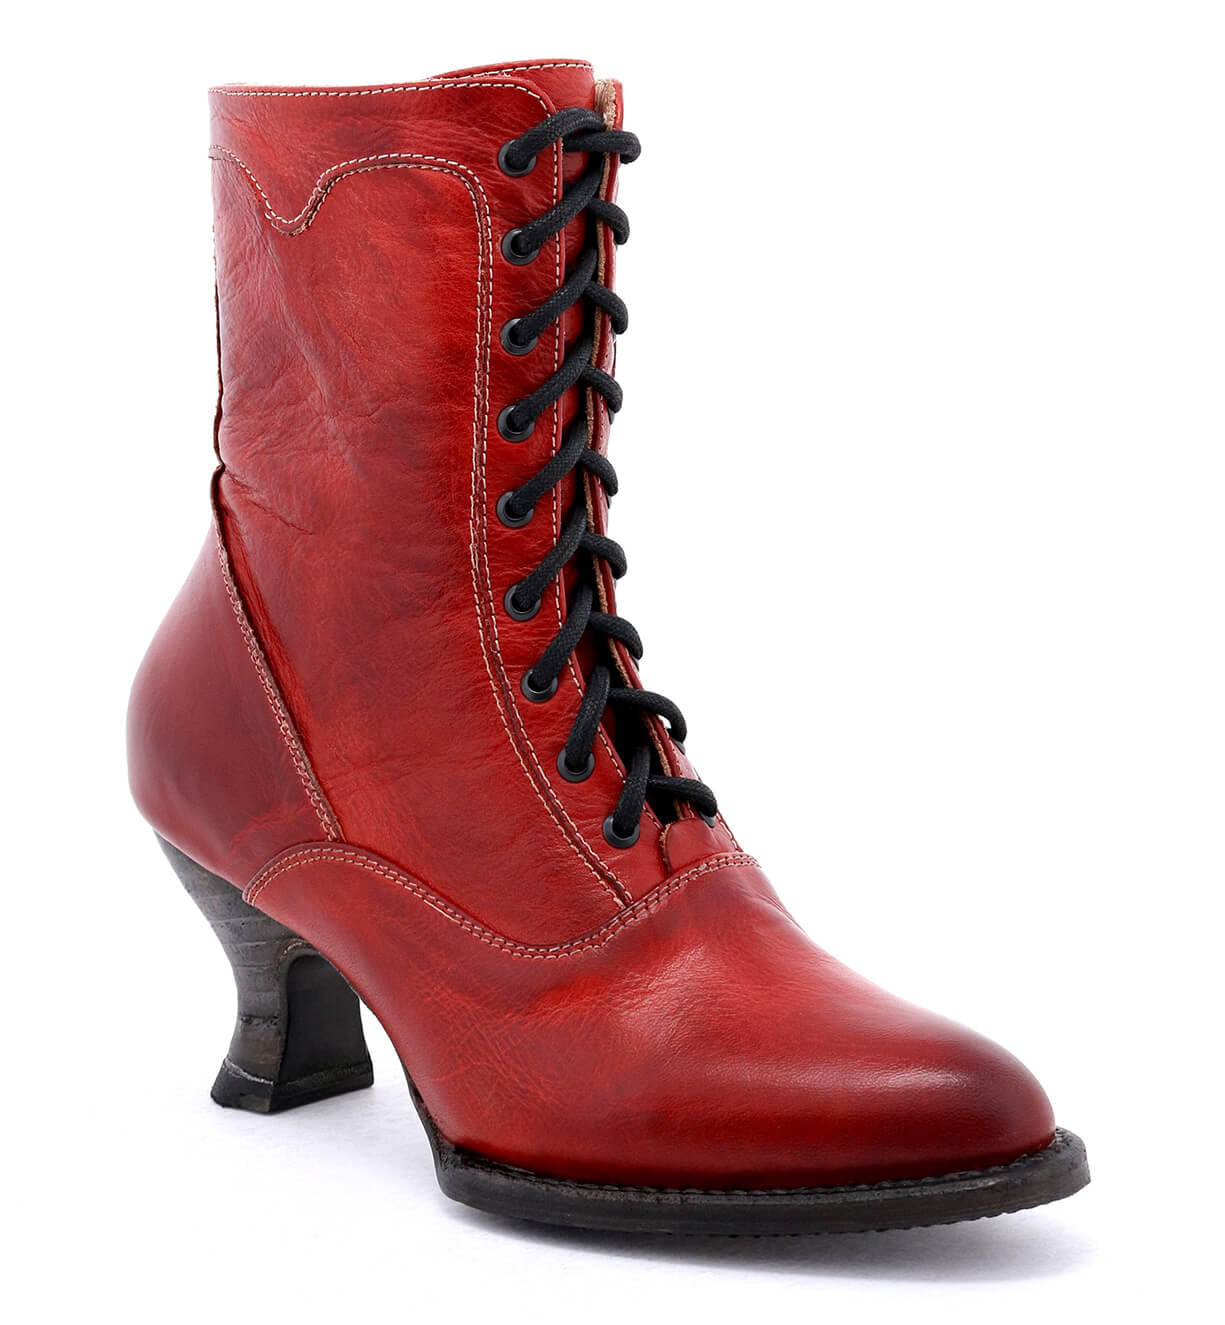 A hand-dyed women's red leather ankle boot with laces, crafted in an uncompromising quality reflecting Victorian style, named Eleanor by Oak Tree Farms.